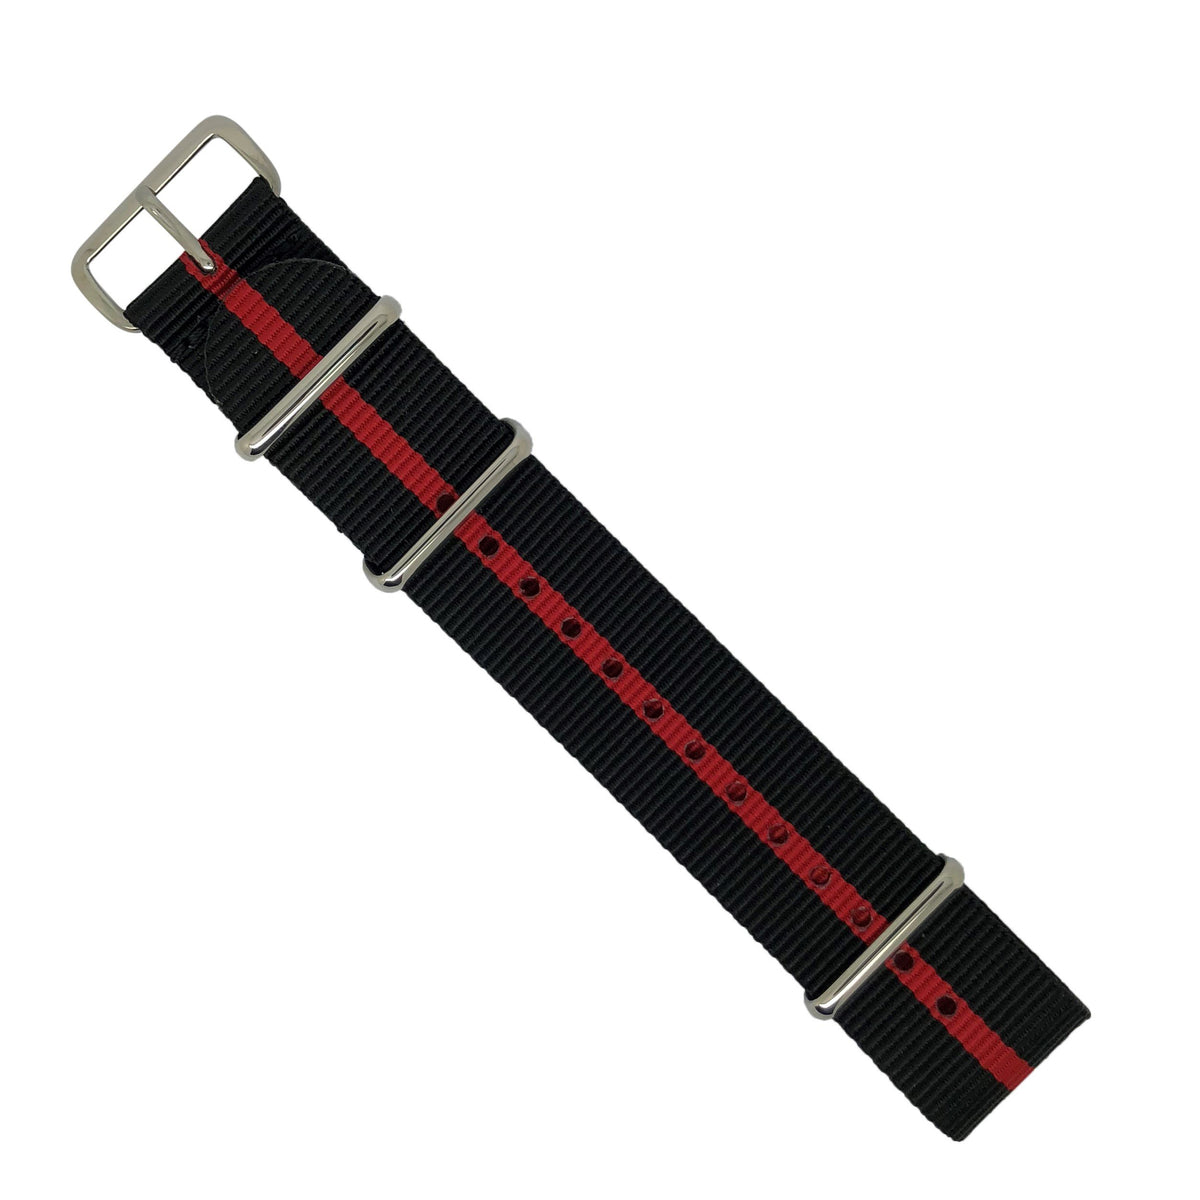 Premium Nato Strap in Black Center Red with Polished Silver Buckle (22mm) - Nomadstore Singapore